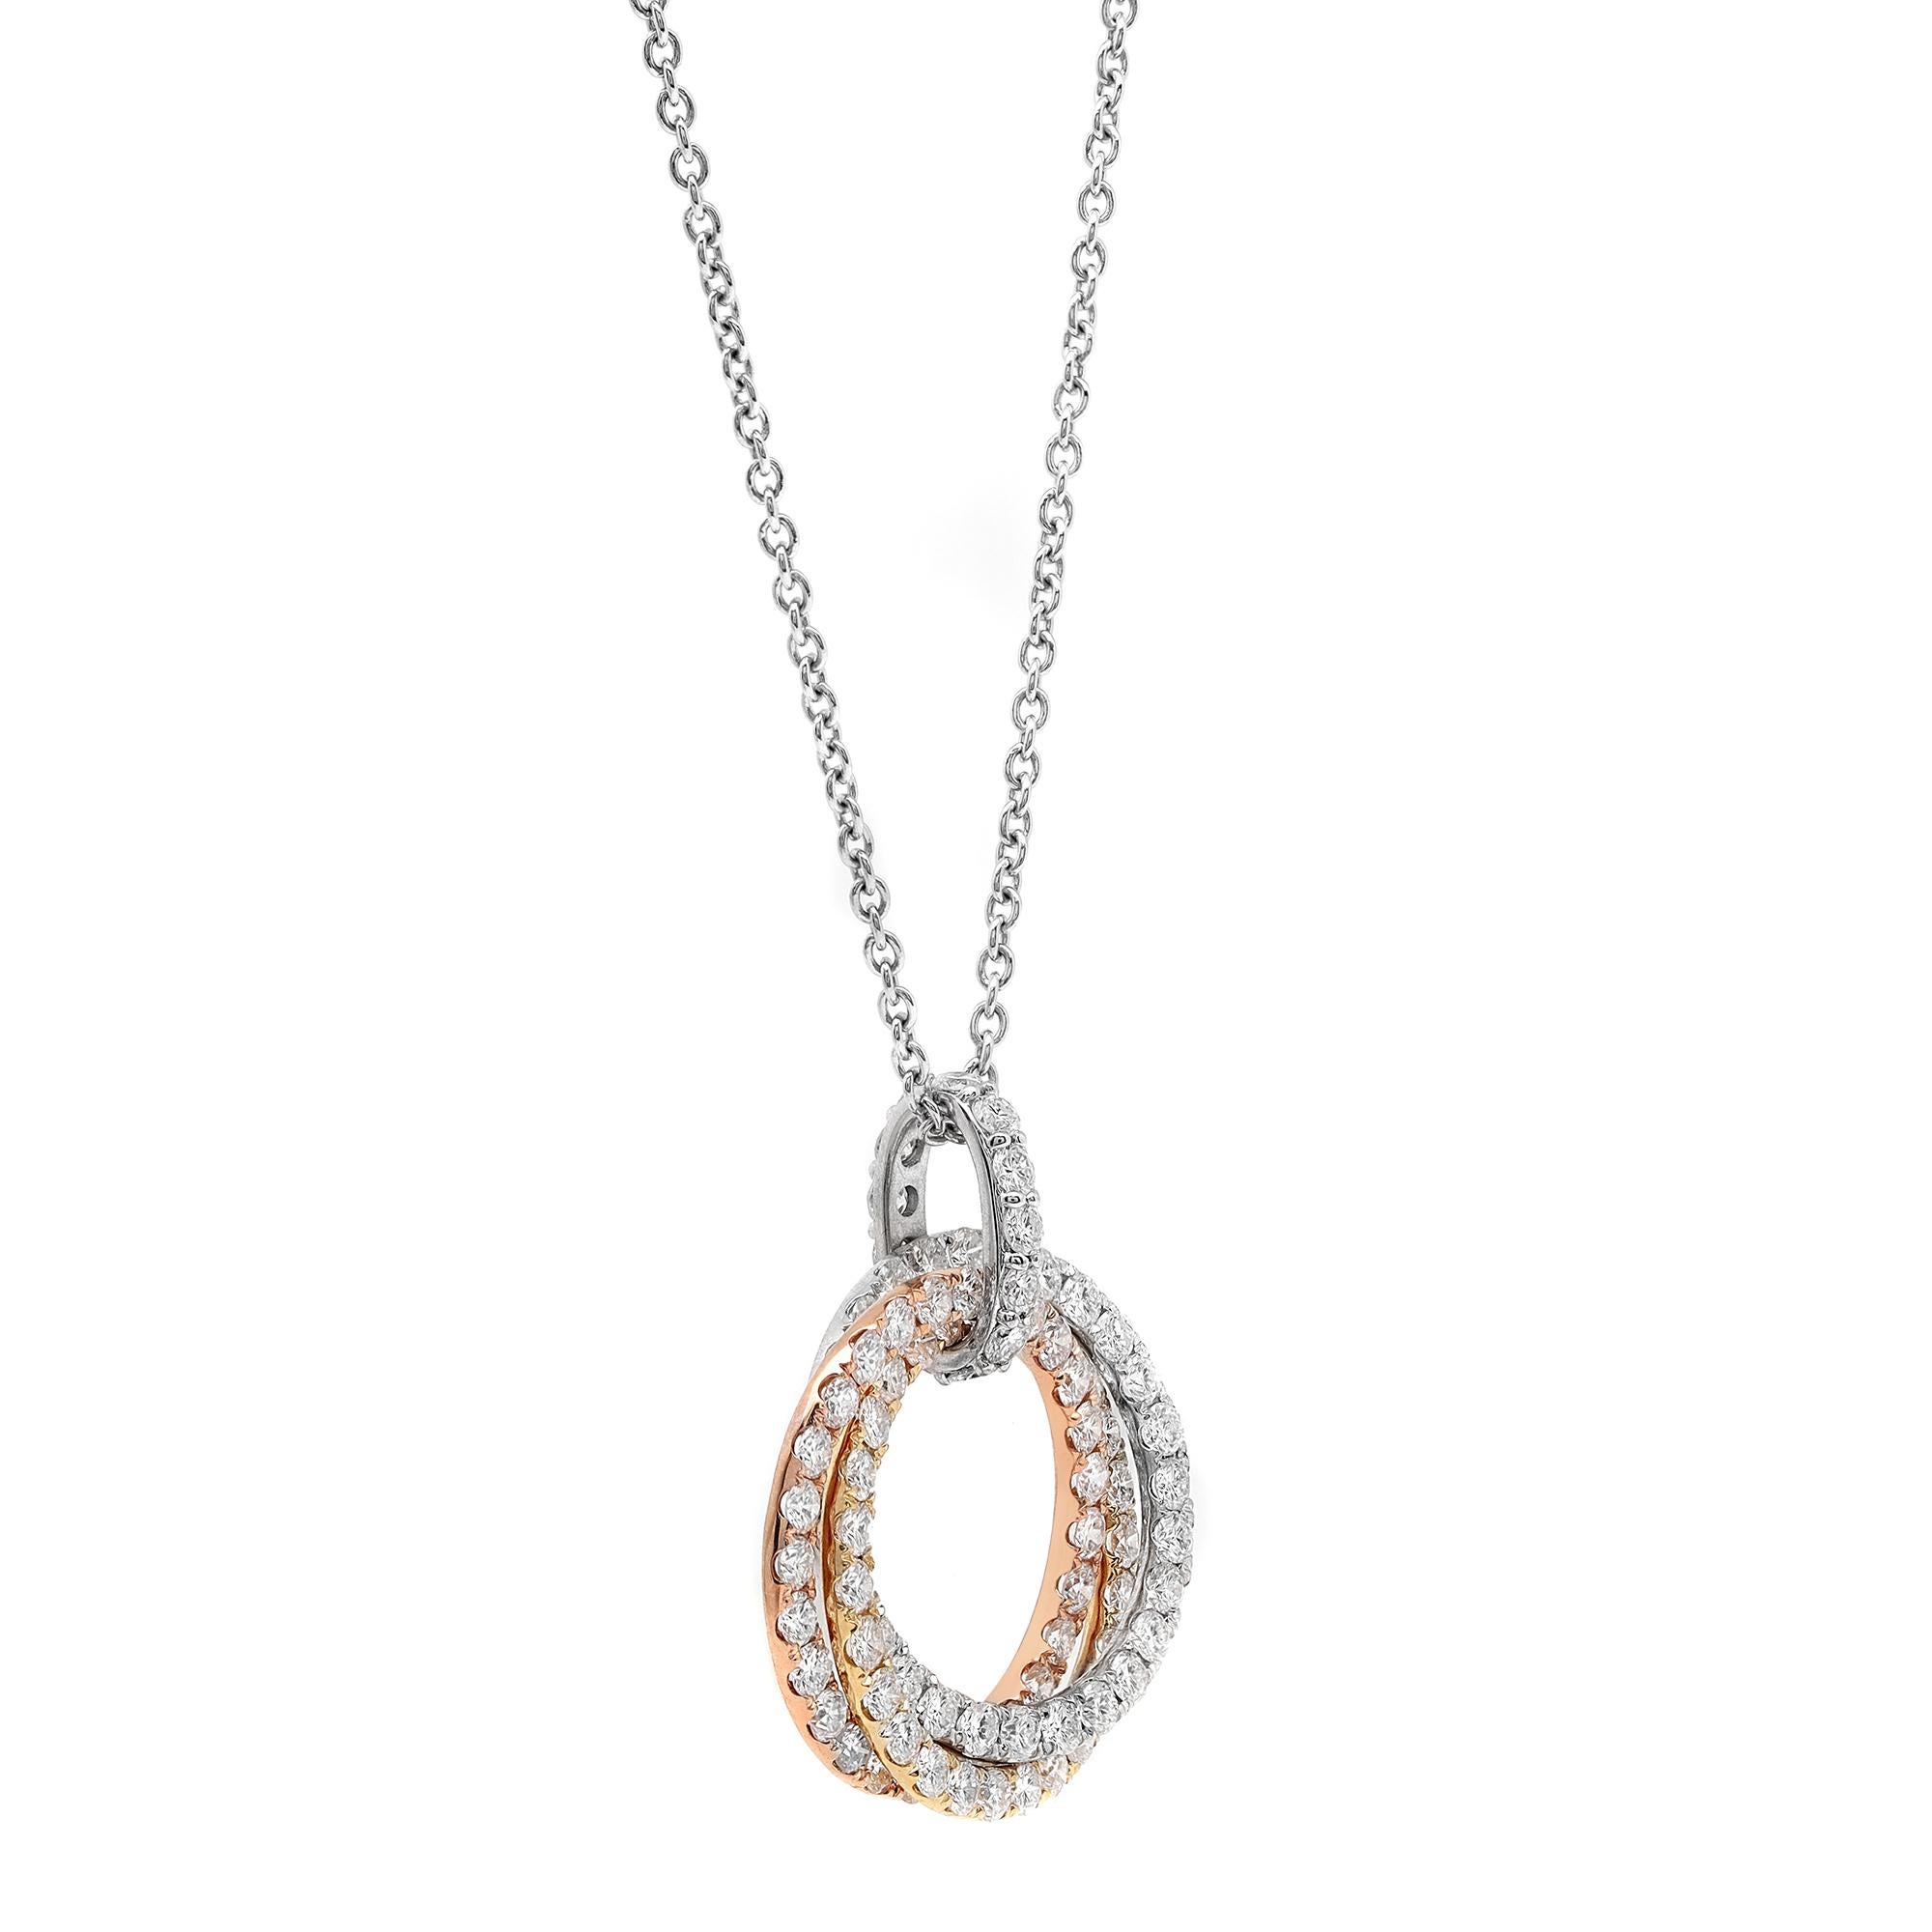 Fabulous and dramatic, this dazzling diamond multi rings pendant necklace is a perfect accent to every day and evening looks. It features round brilliant cut diamonds weighing 3.02 carats set in three circle shaped cut out rings pendant, crafted in